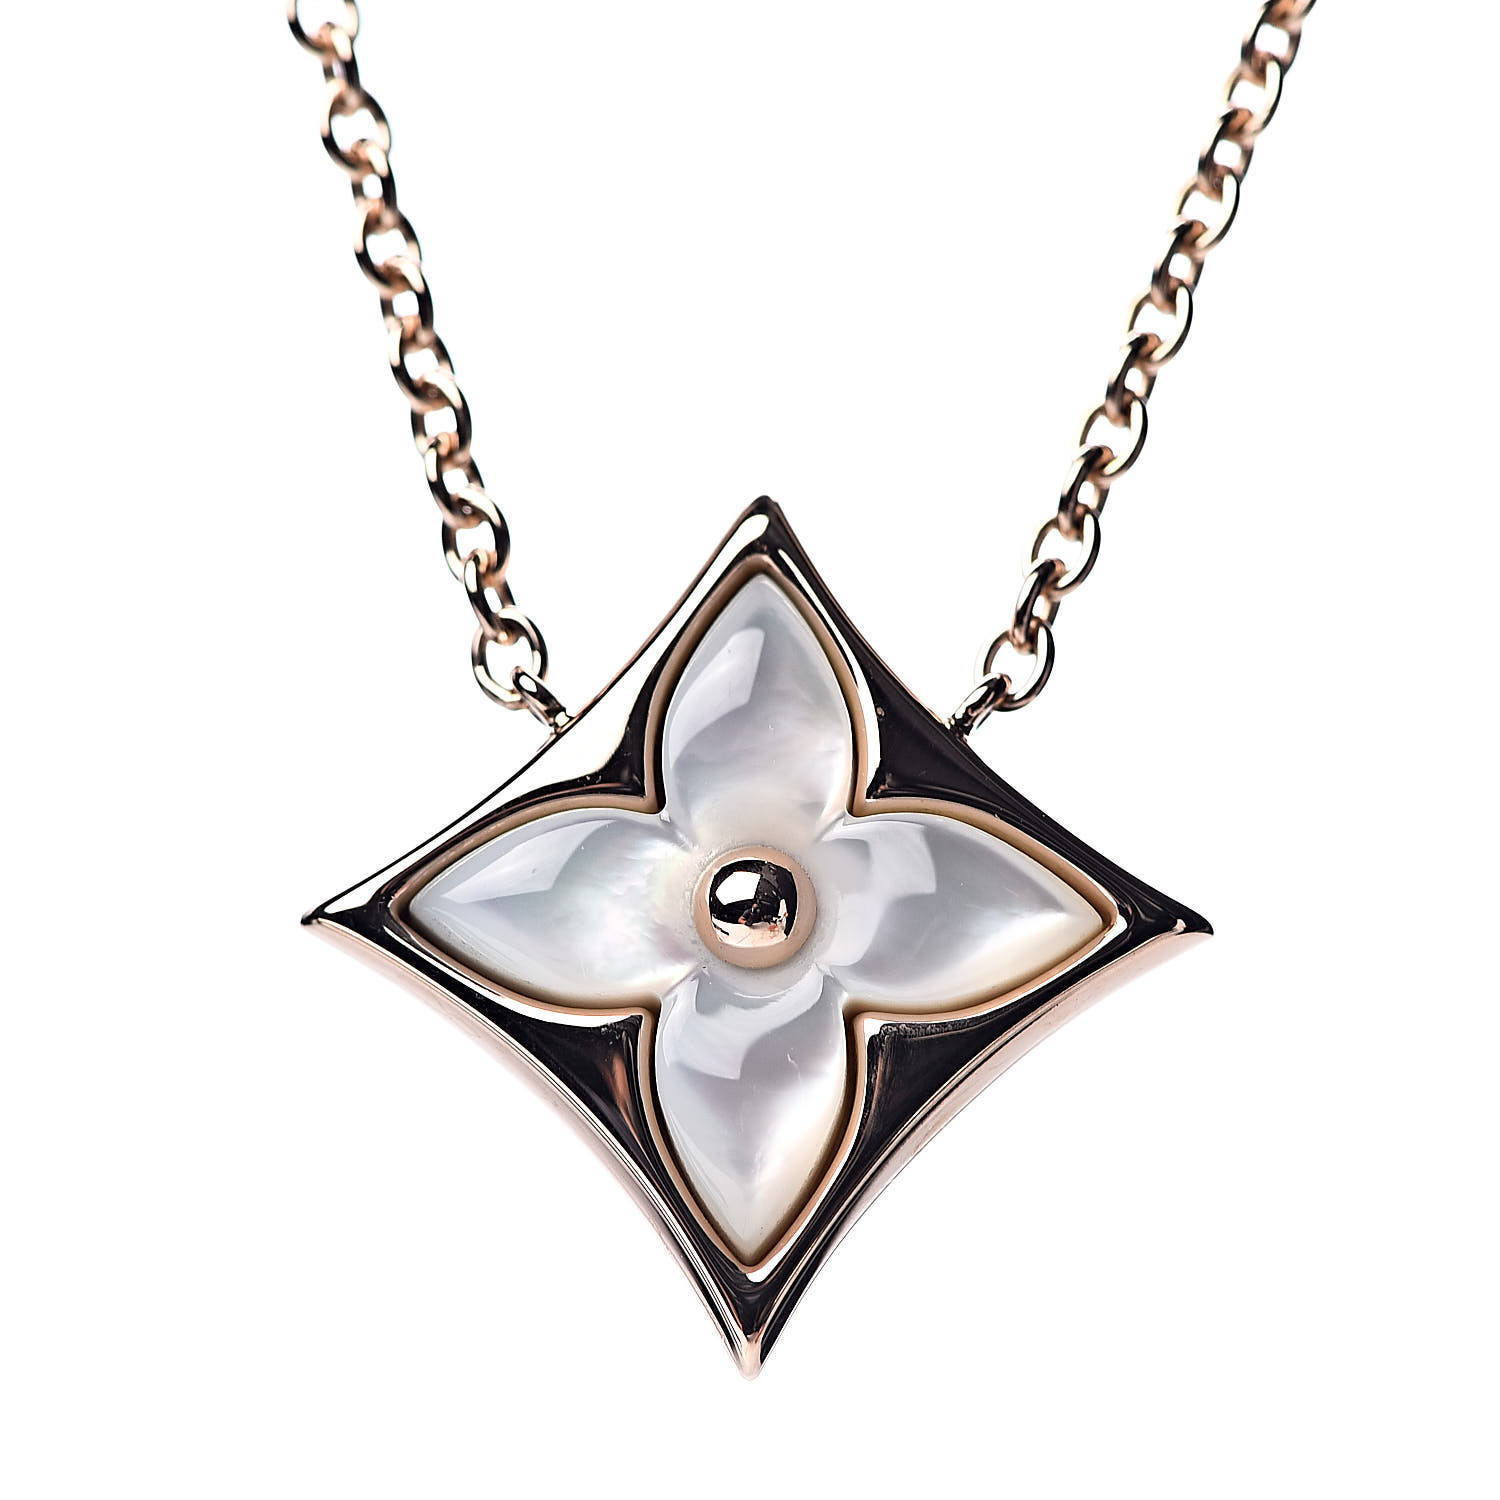 Louis Vuitton Color Blossom Necklace, Pink Gold, White Gold, Pink Opal, White Mother-of-Pearl and Diamonds. Size NSA